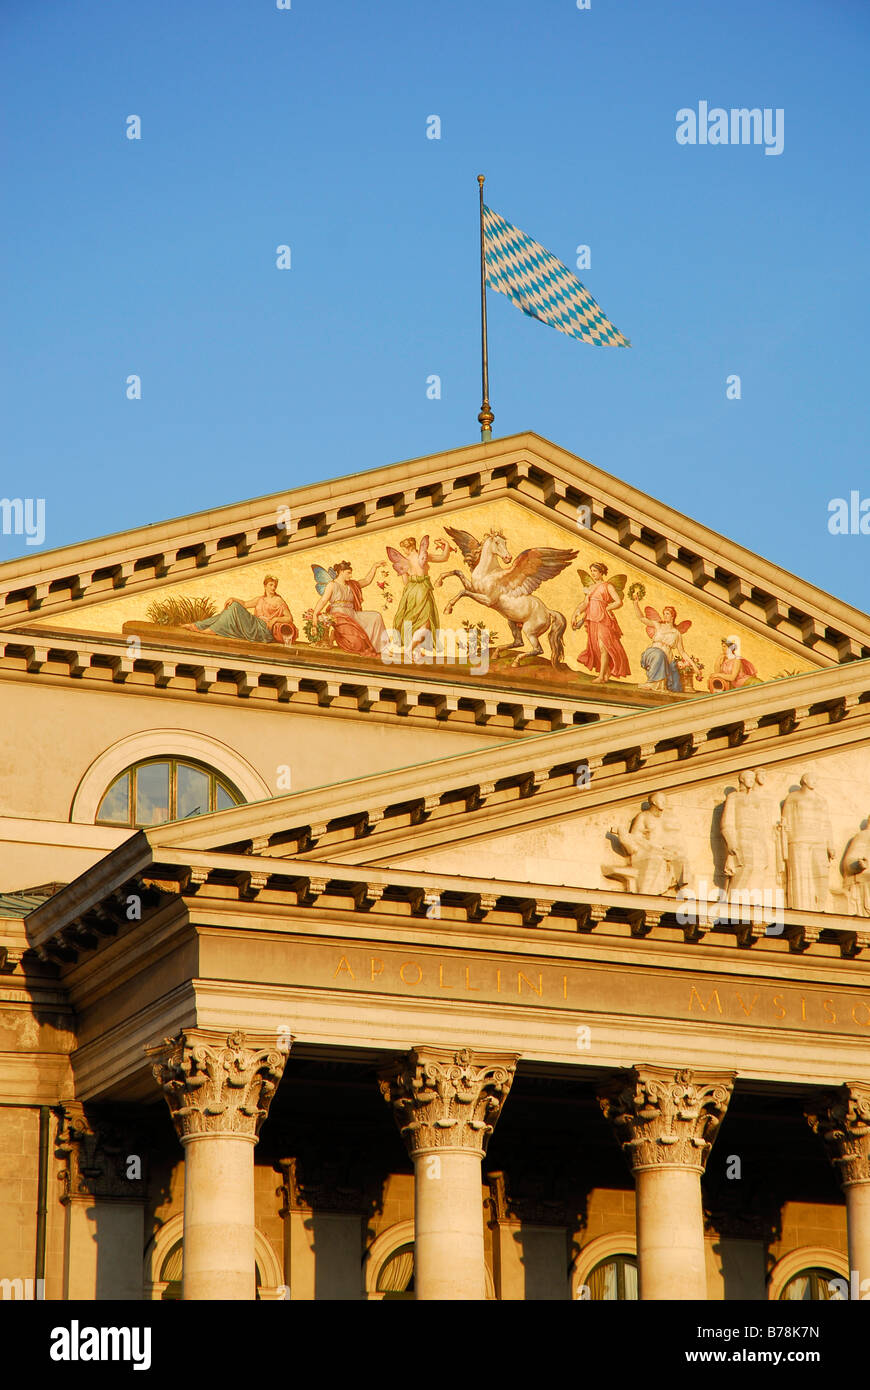 National Theatre, neoclassical facade and pillars, Bavarian State Opera House at Max Joseph Square, Altstadt, Old Town, Munich, Stock Photo